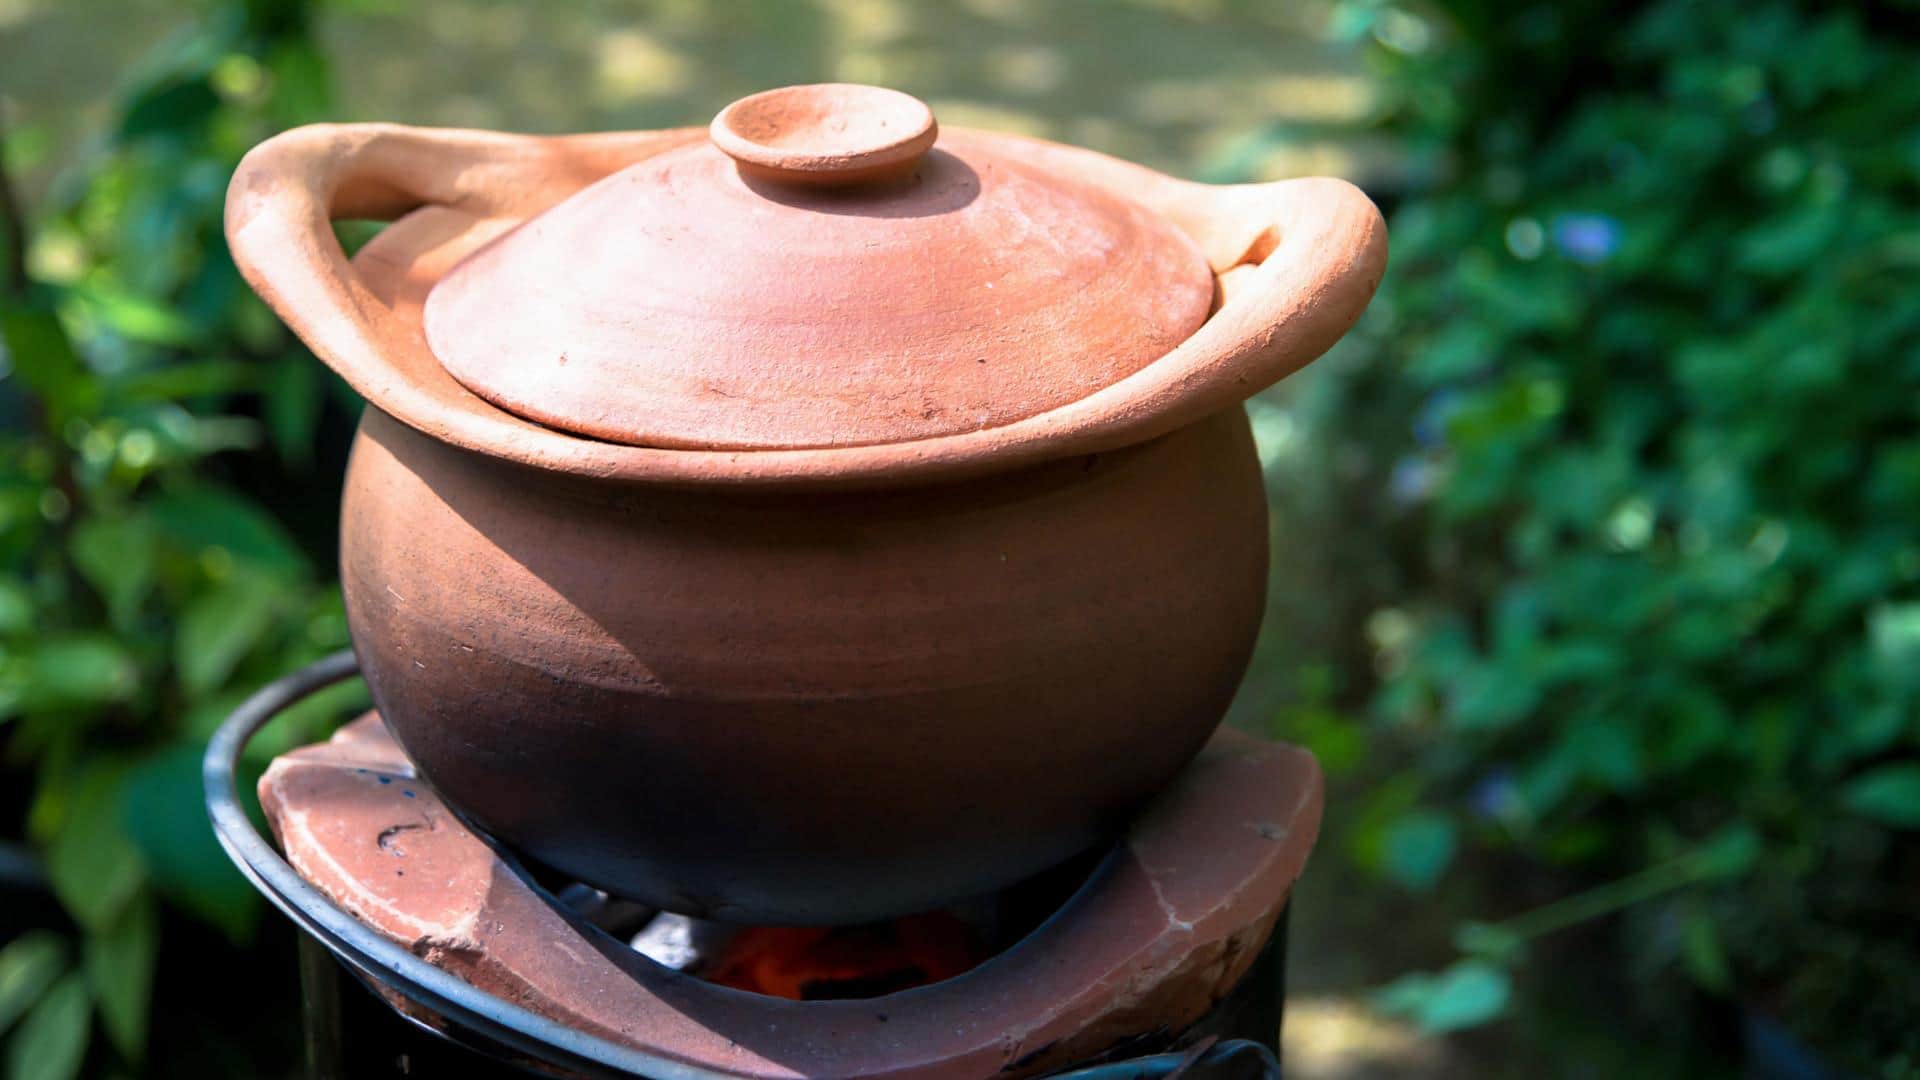 Clay Pot Cooking: The Healthiest Way to Prepare Food